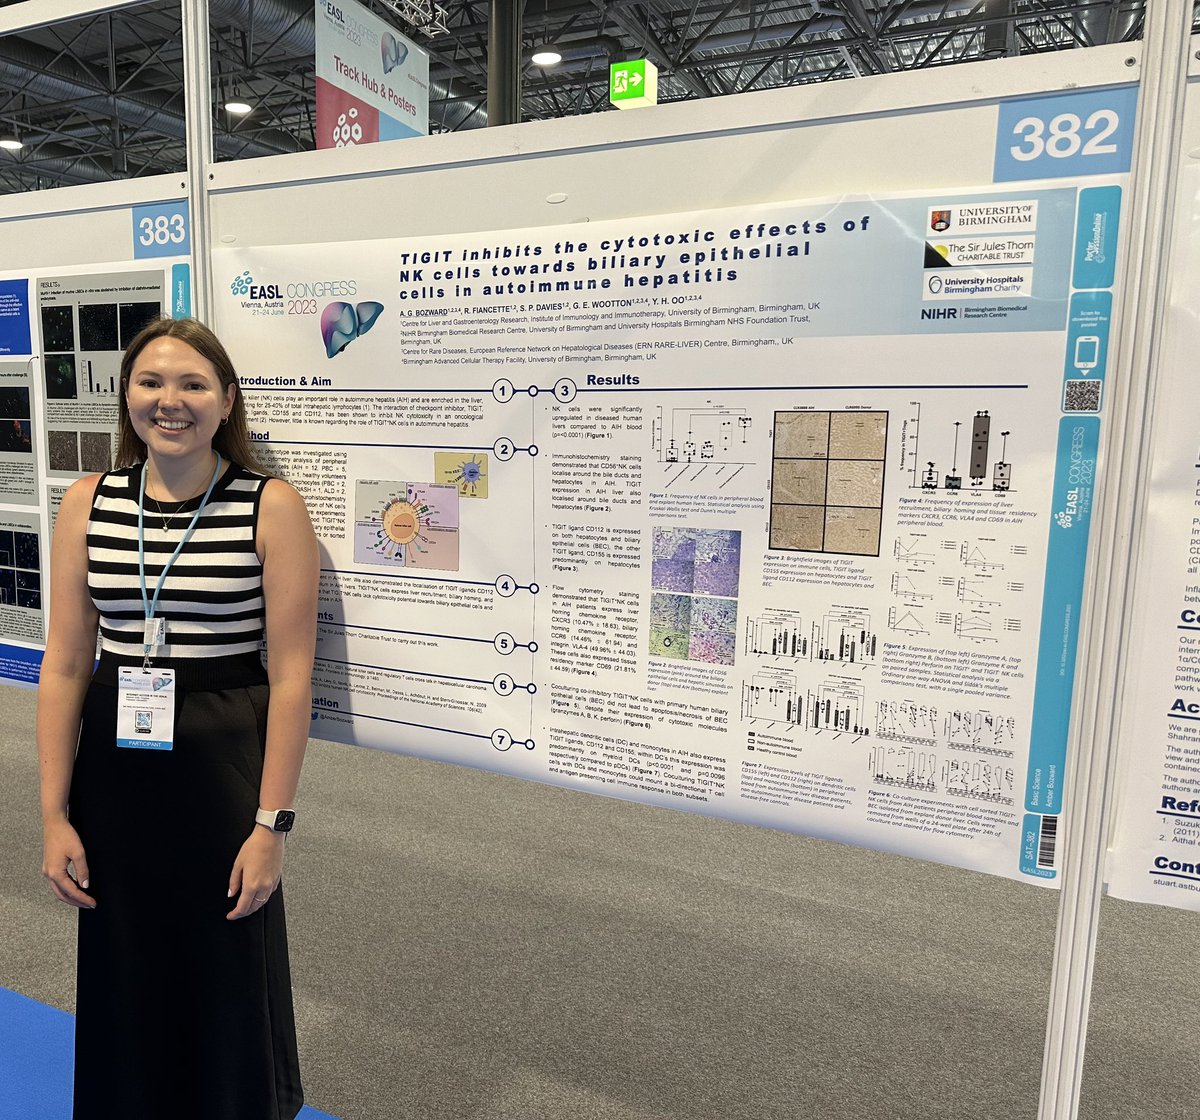 👩🏻‍🔬TIGIT expression on NK cells in autoimmune hepatitis
Thanks @EASLnews for allowing me to share my PhD research at #EASL2023 #EASLCongress